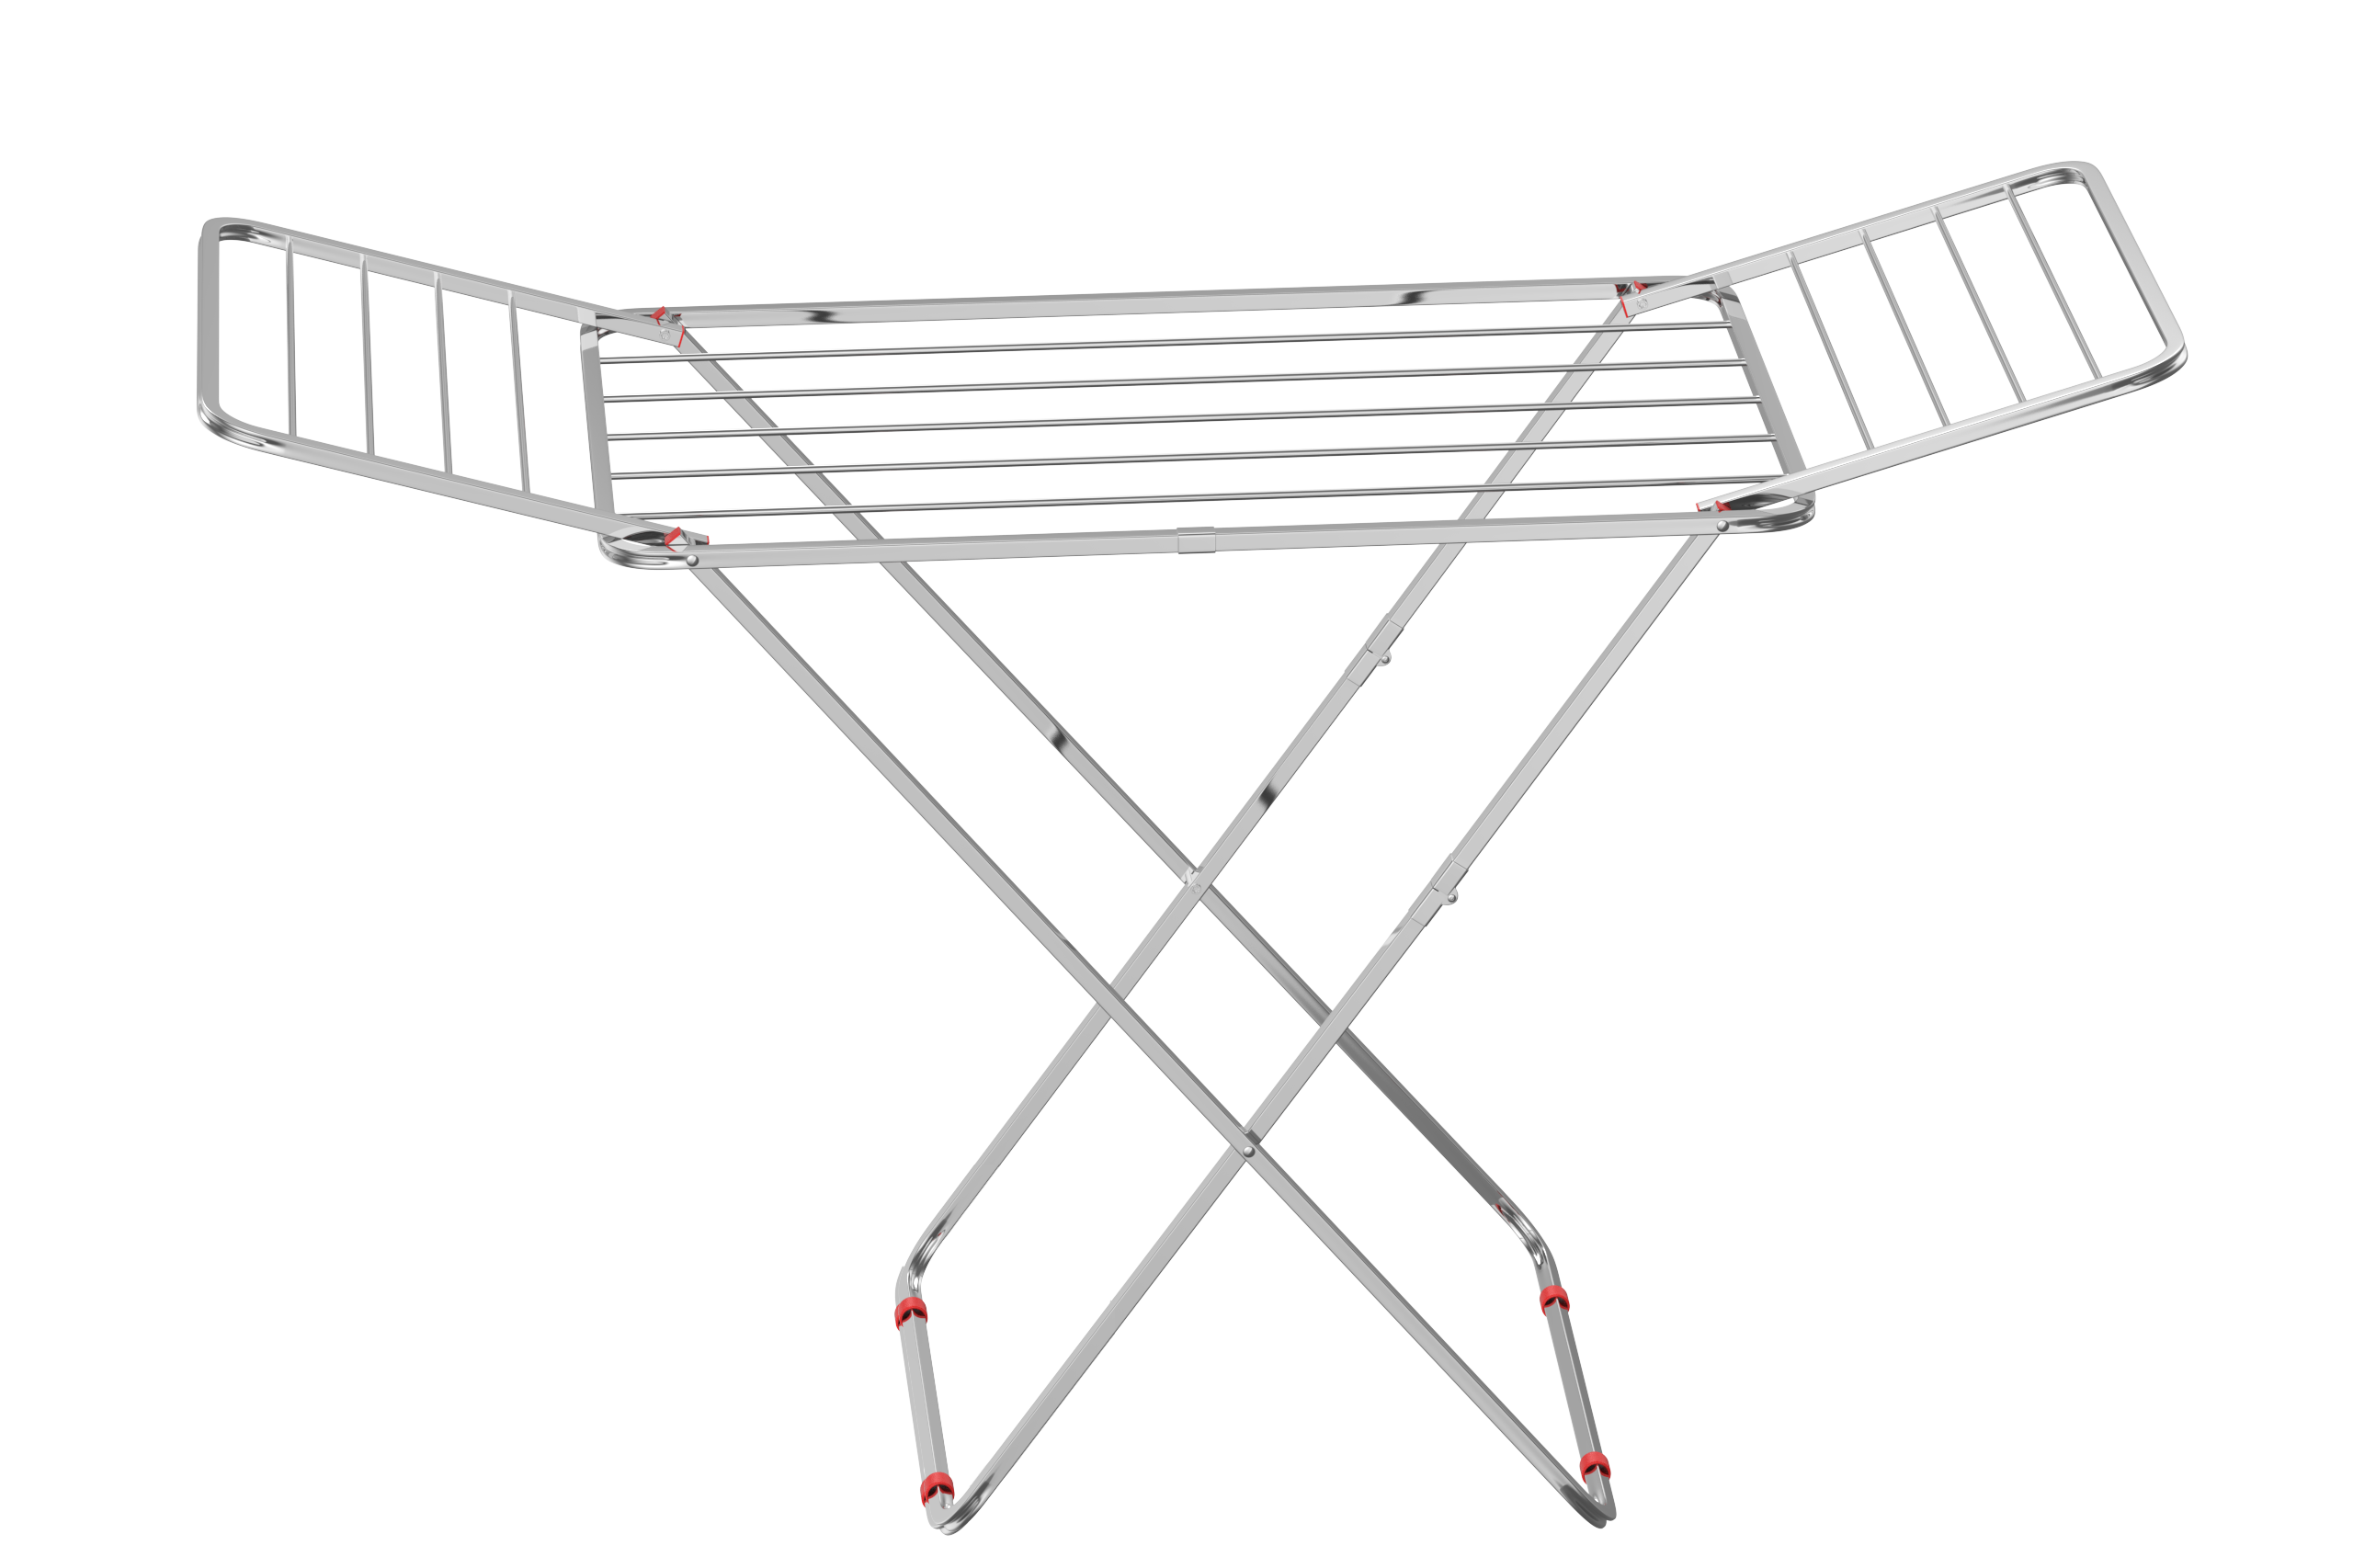 Foldable Stainless Steel Cloth Dryer Stand Online at Peng Essentials